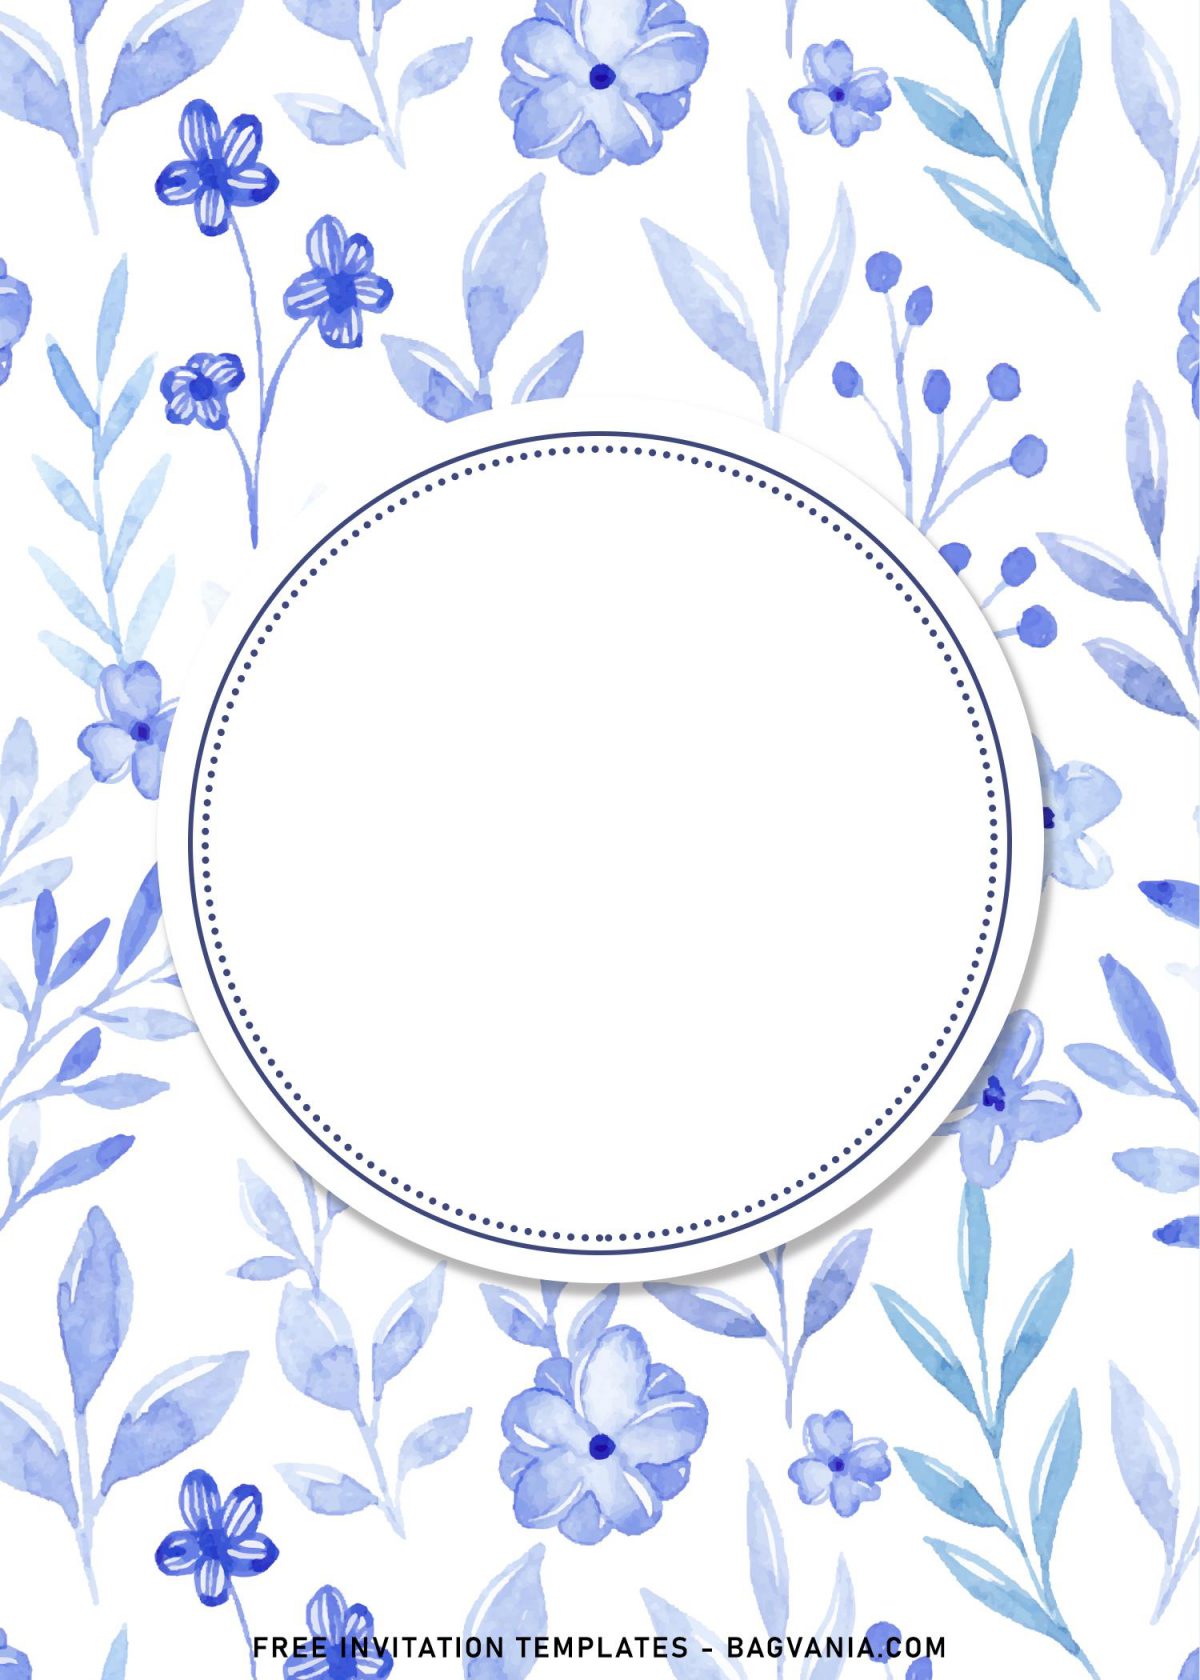 9+ Blue Floral Birthday Invitation Templates and has blue floral painting